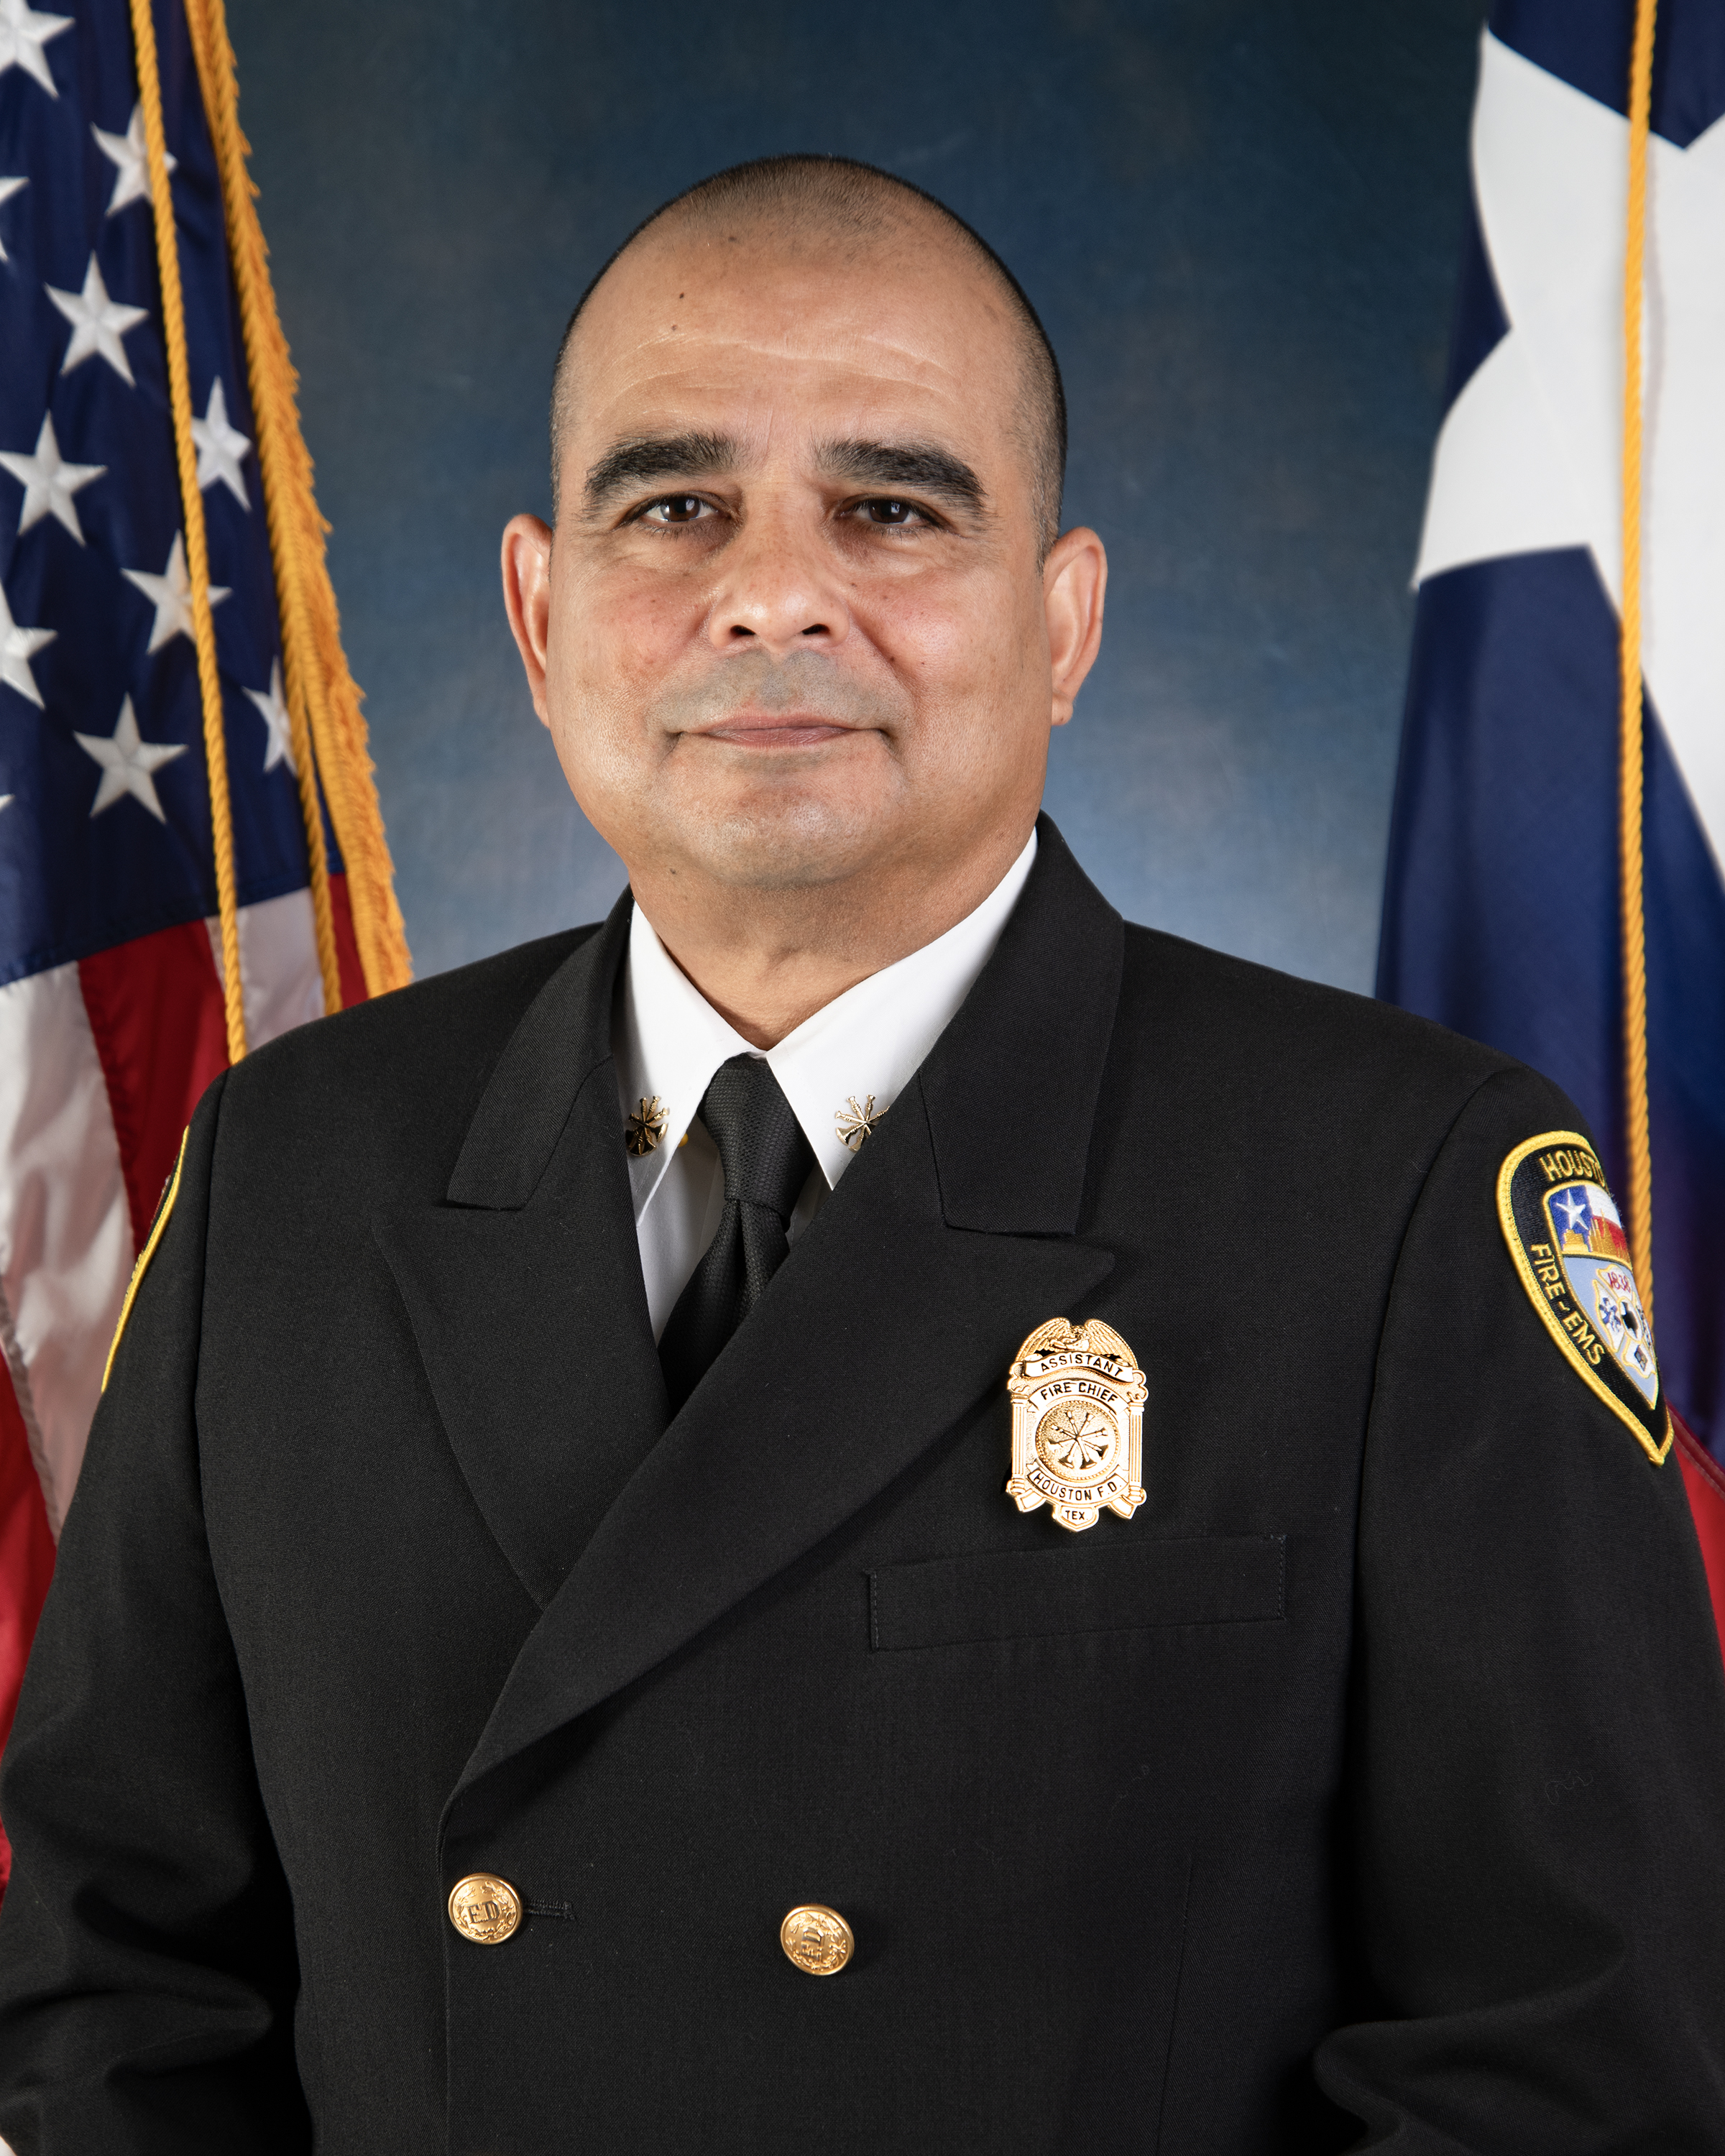 HFD Assistant Chief Michael Zapata